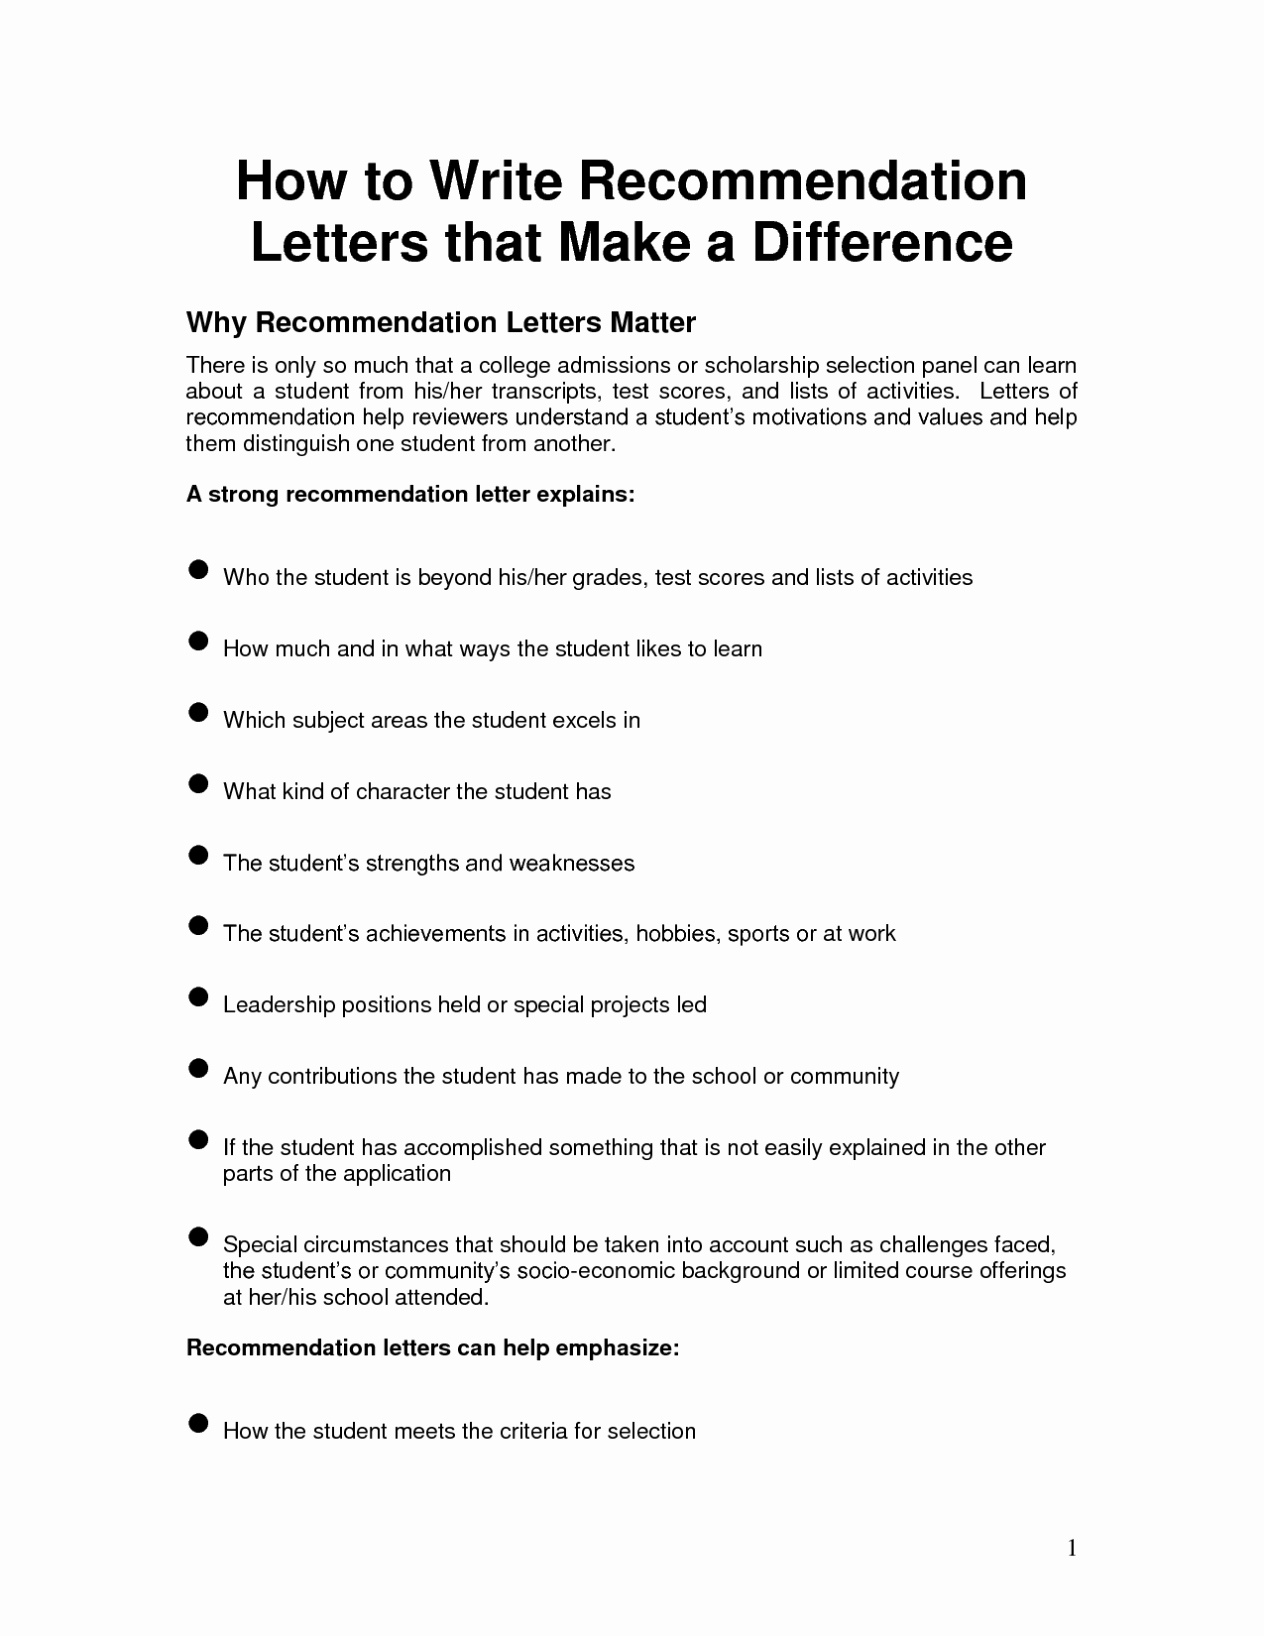 Writing A Letter Of Re Mendation Template Sample